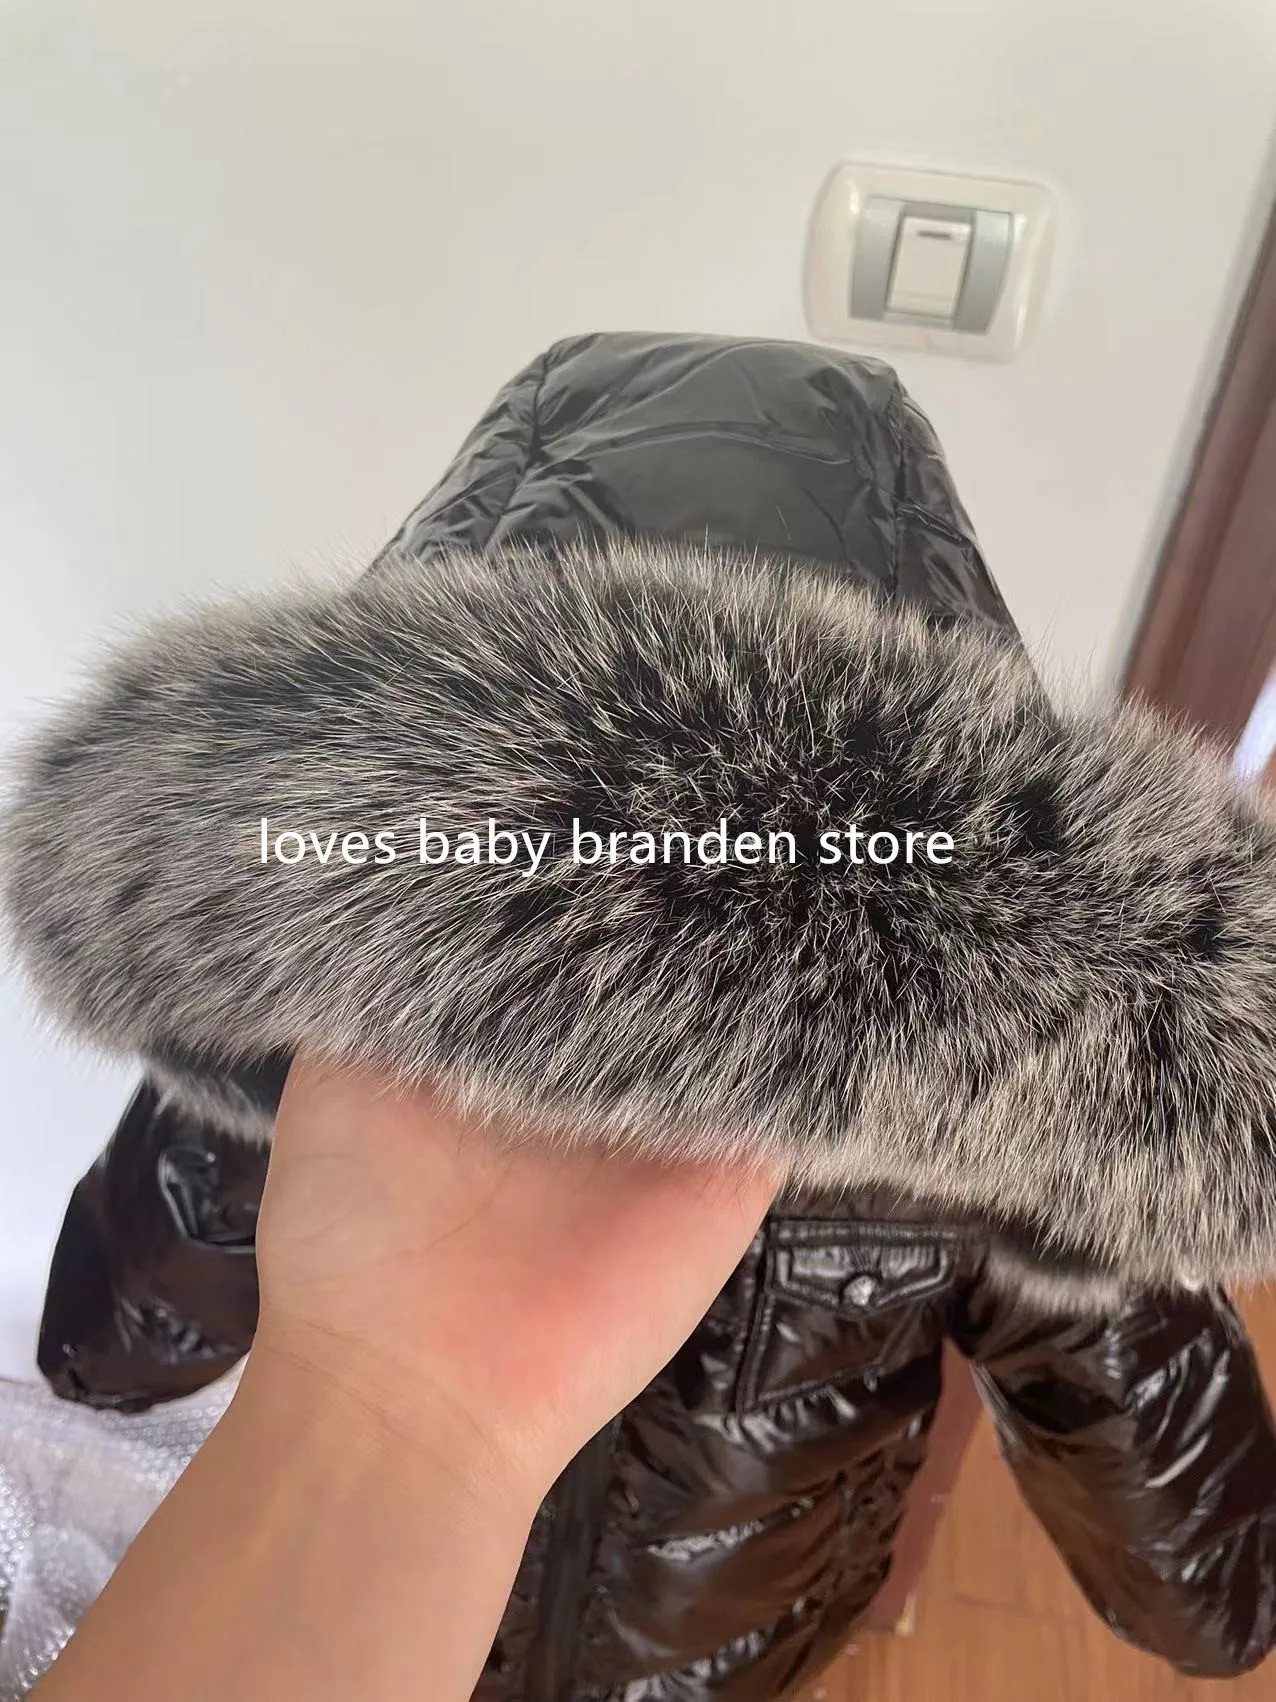 New Russian Winter Children Down Jacket Overall Suit big Real Fur Collar Kids Ski Suit Boys Girls Plus Warm Jacket Silver ws876 images - 6